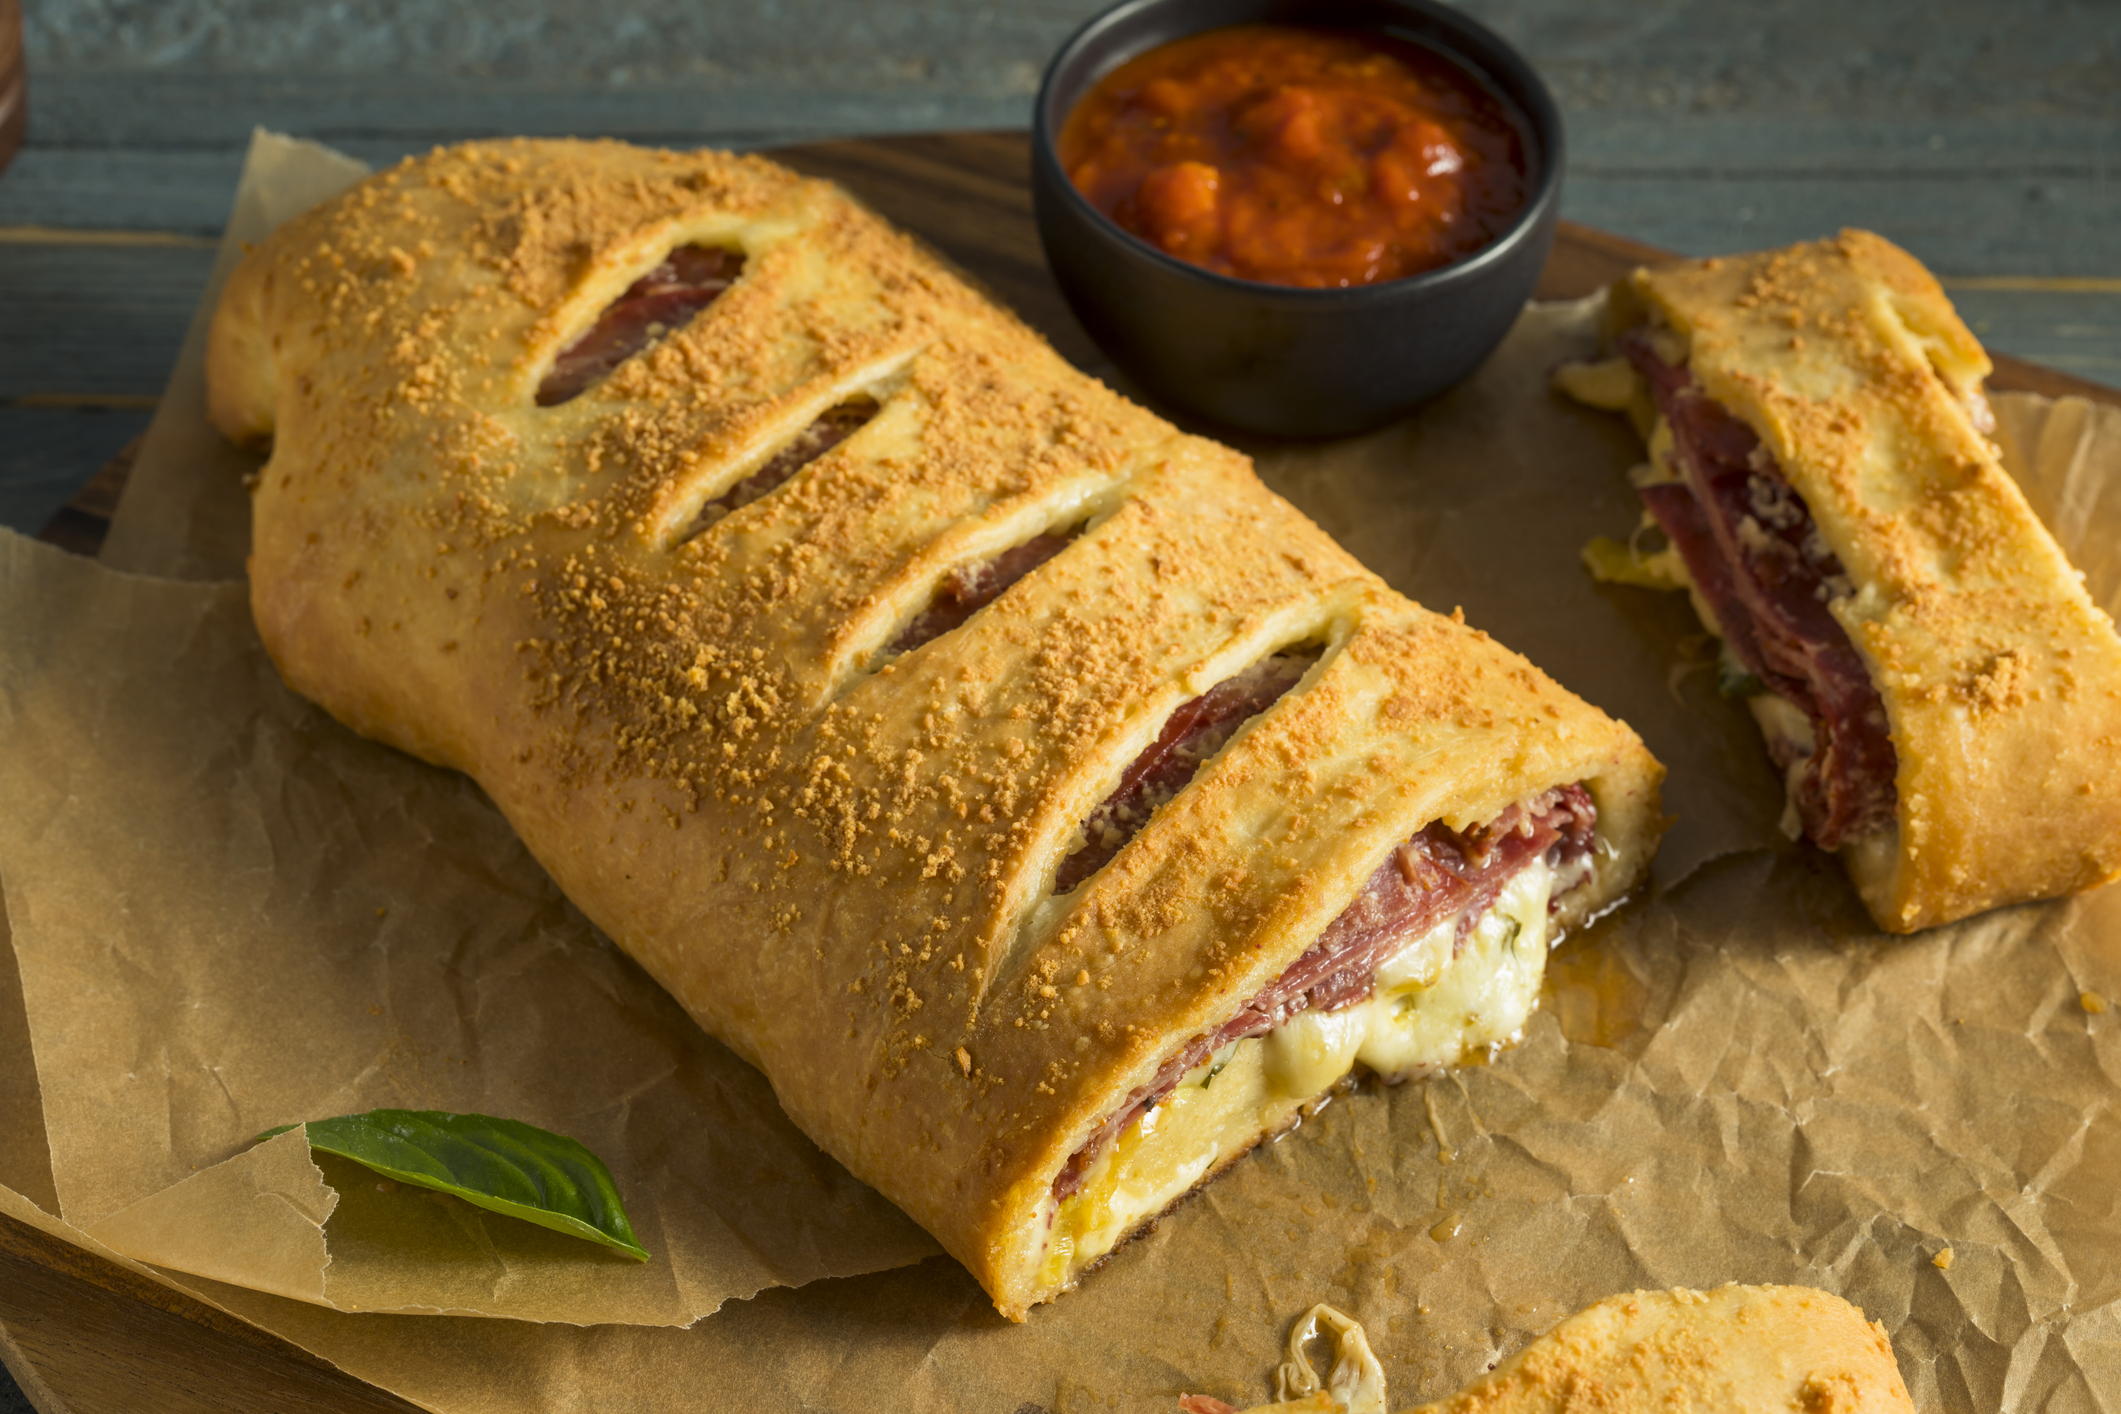 "Garbage Bread" - rolled stromboli-like bread with meat and cheese filling. sitting on brown paper bag with tomato dipping sauce in small black bowl.